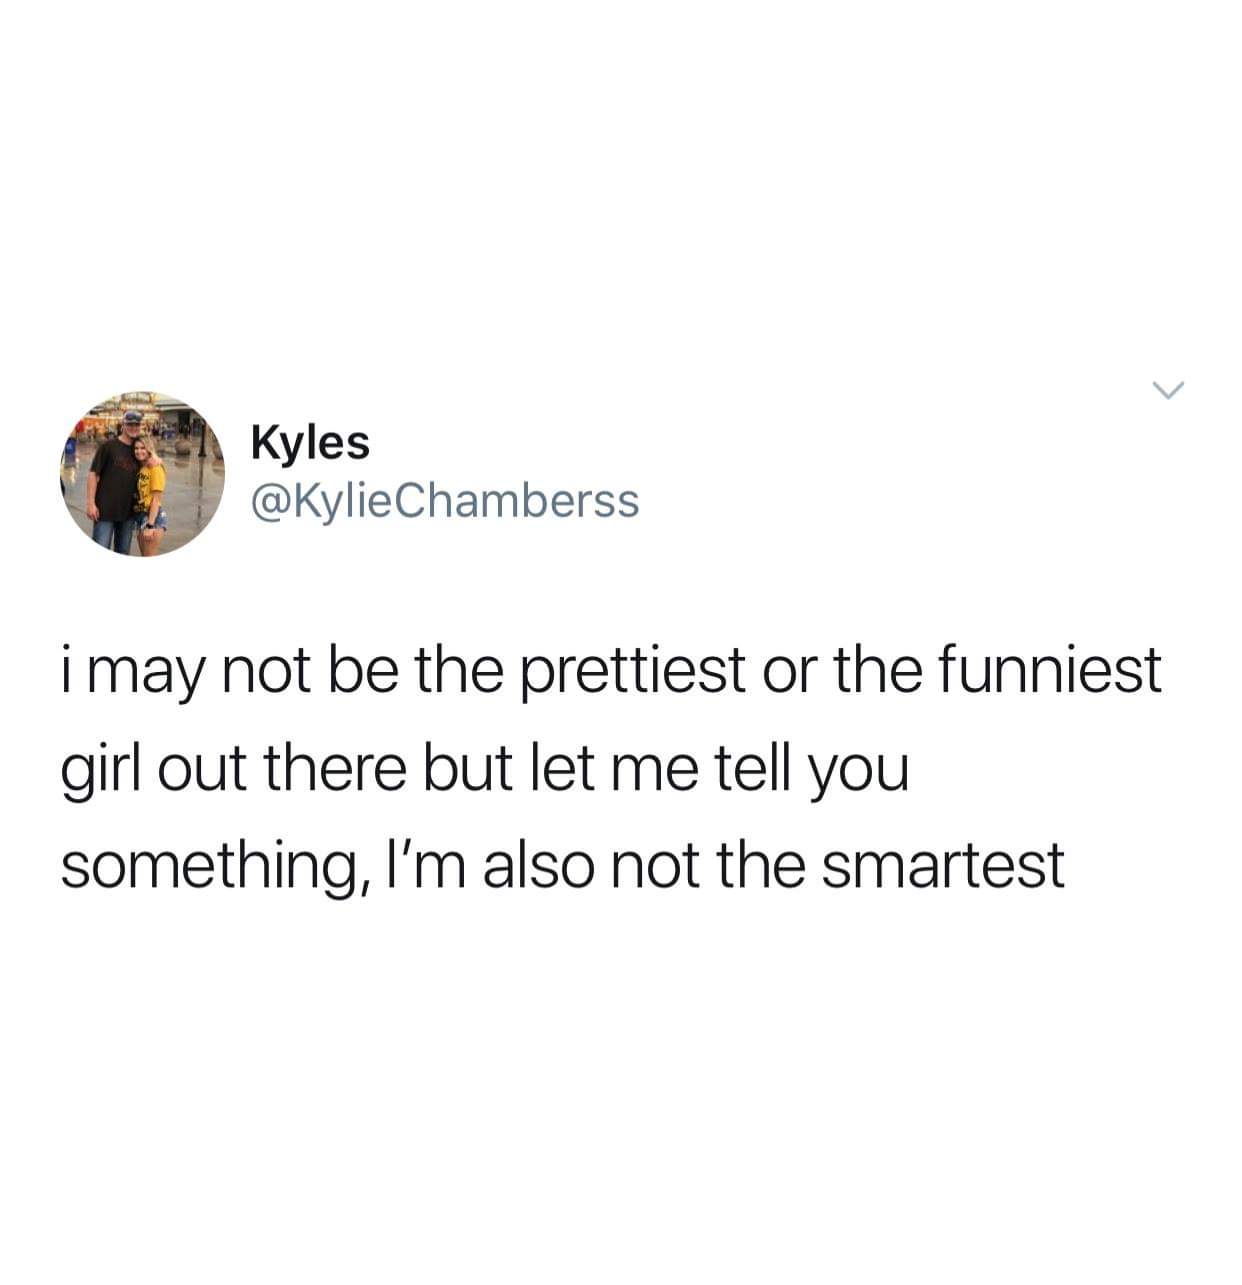 ticketmaster meme - Kyles Chamberss i may not be the prettiest or the funniest girl out there but let me tell you something, I'm also not the smartest